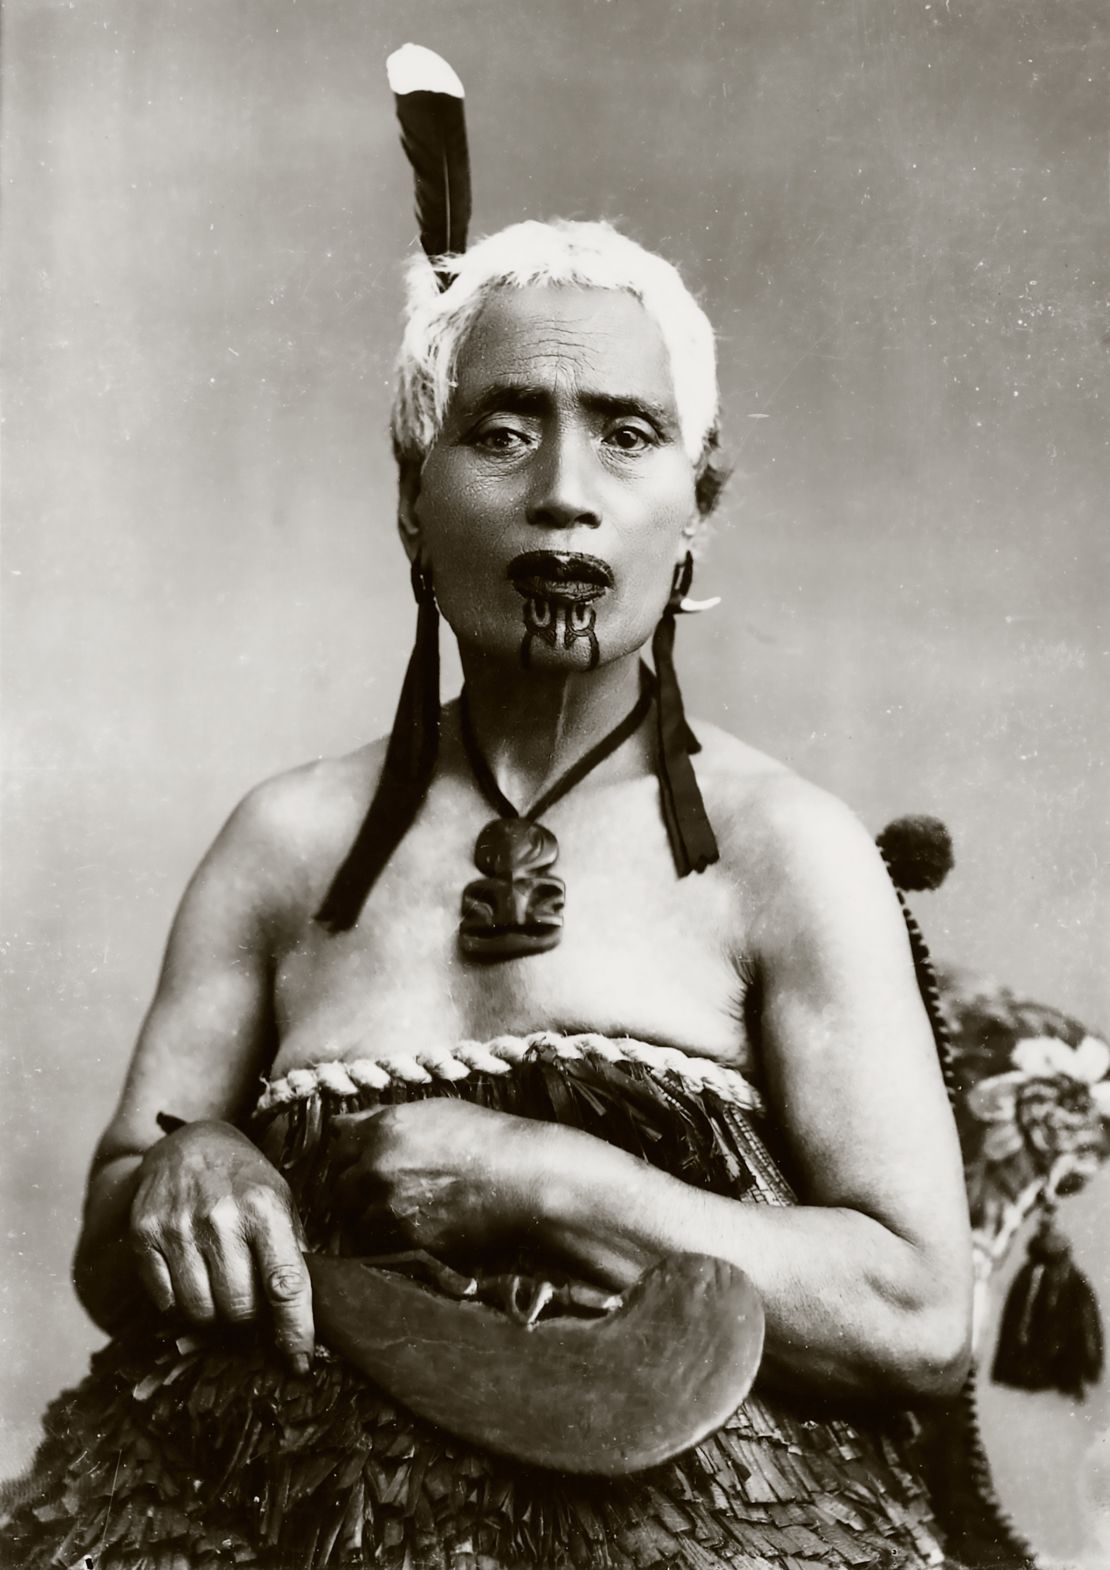 Portrait of a Māori woman with chin moko and feather from the huia bird, ca. 1900s.